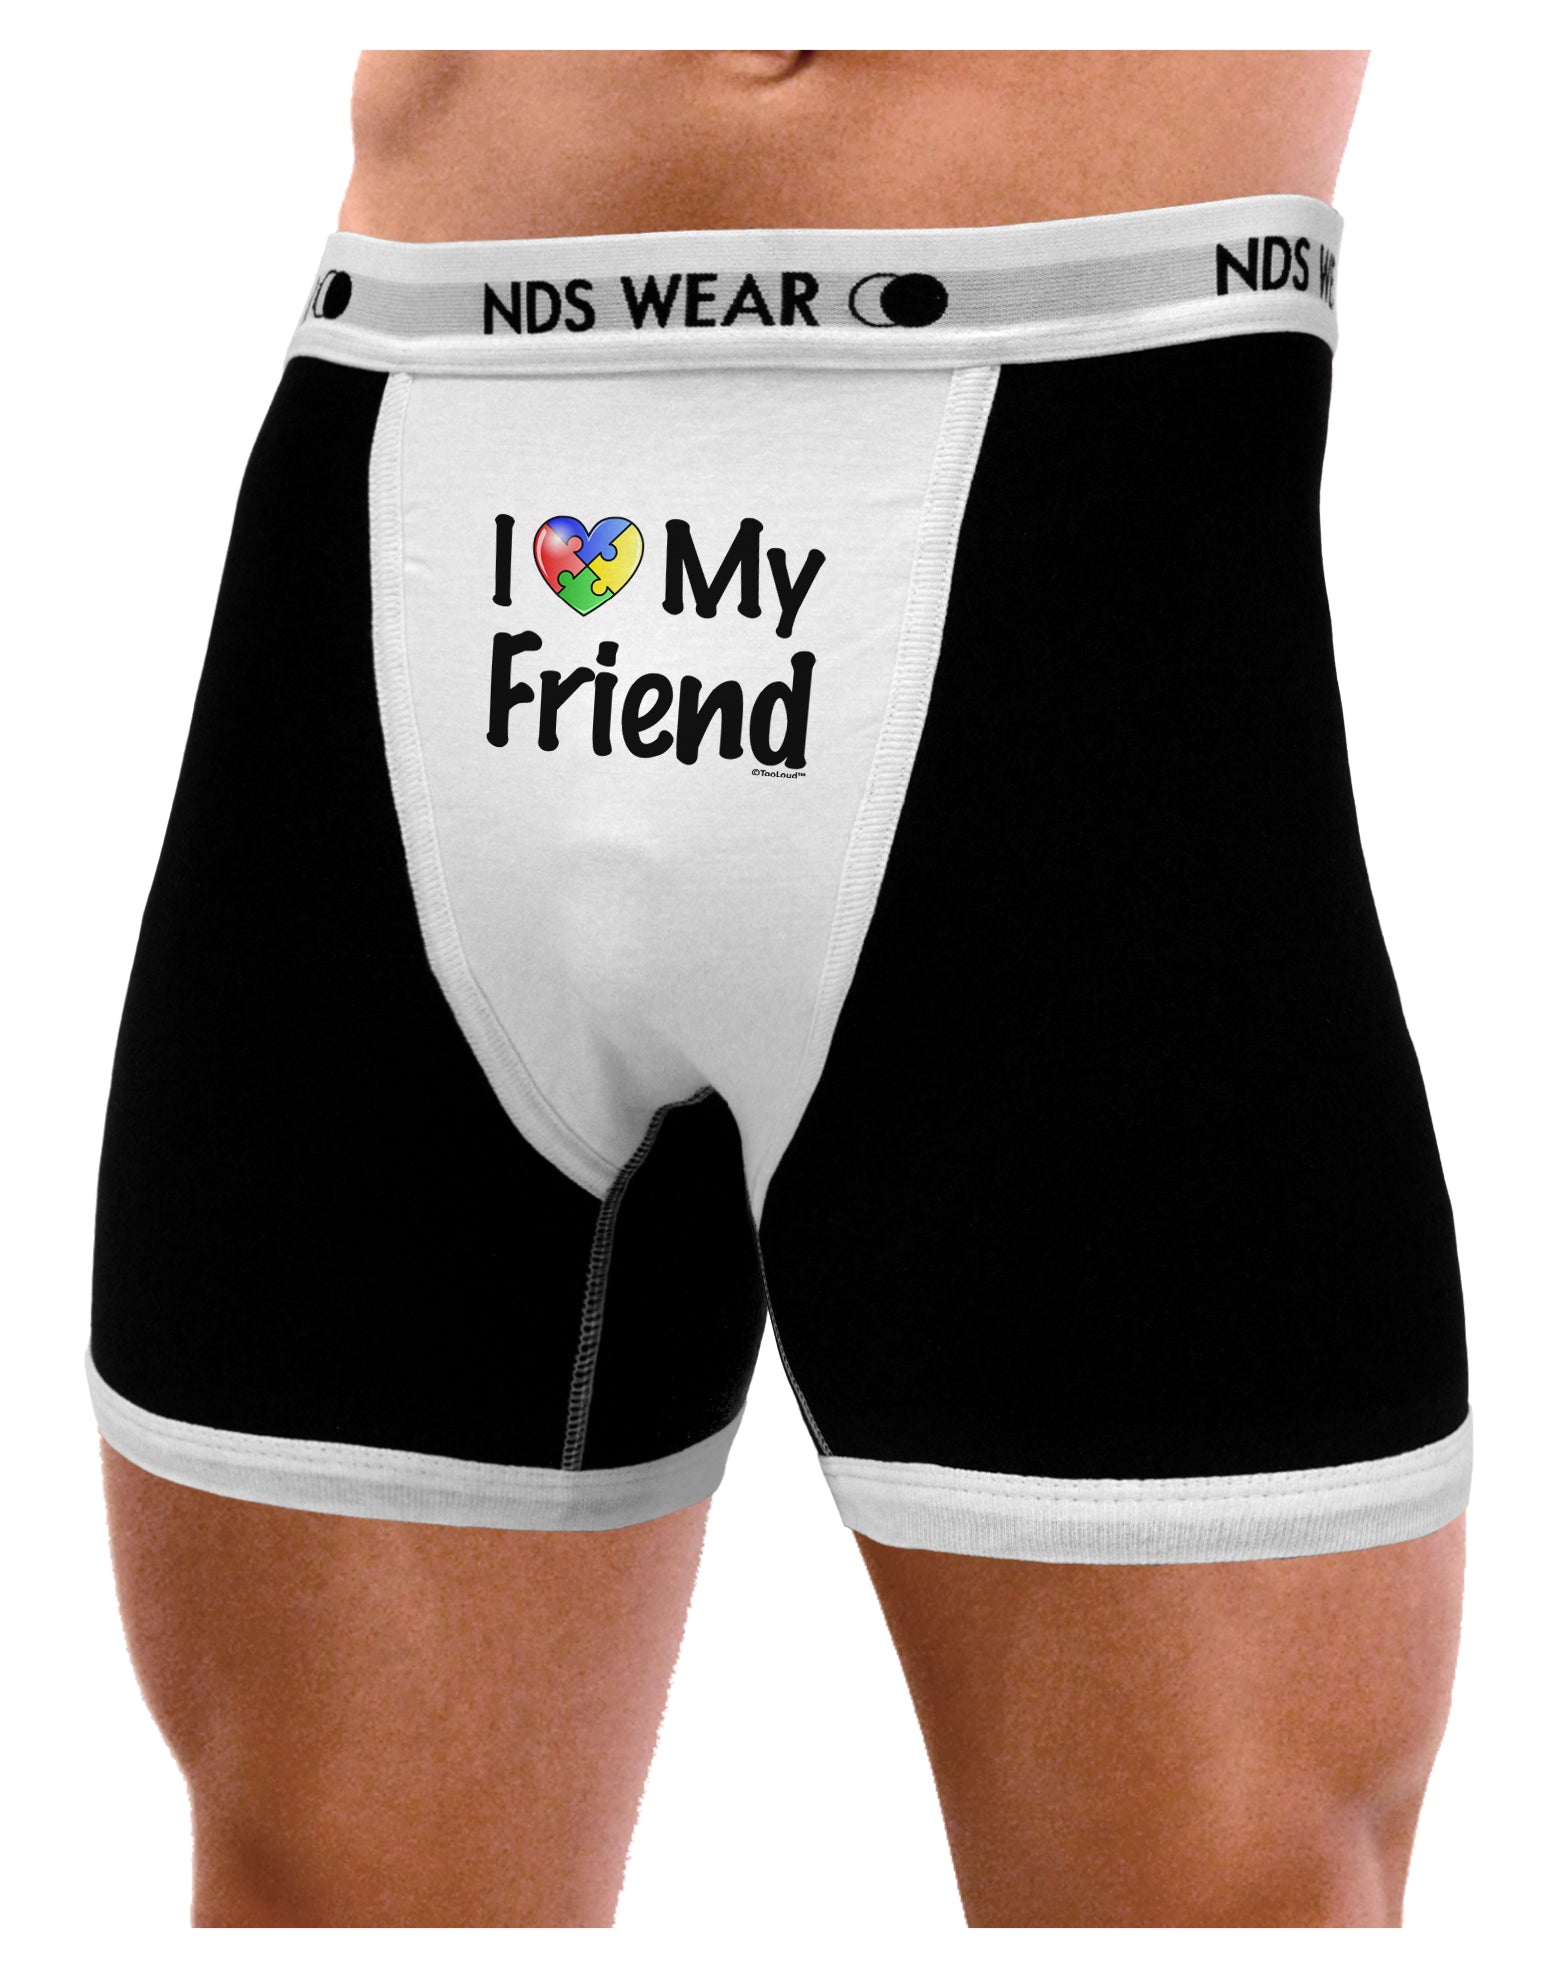 I Heart My Friend - Autism Awareness Mens NDS Wear Boxer Brief